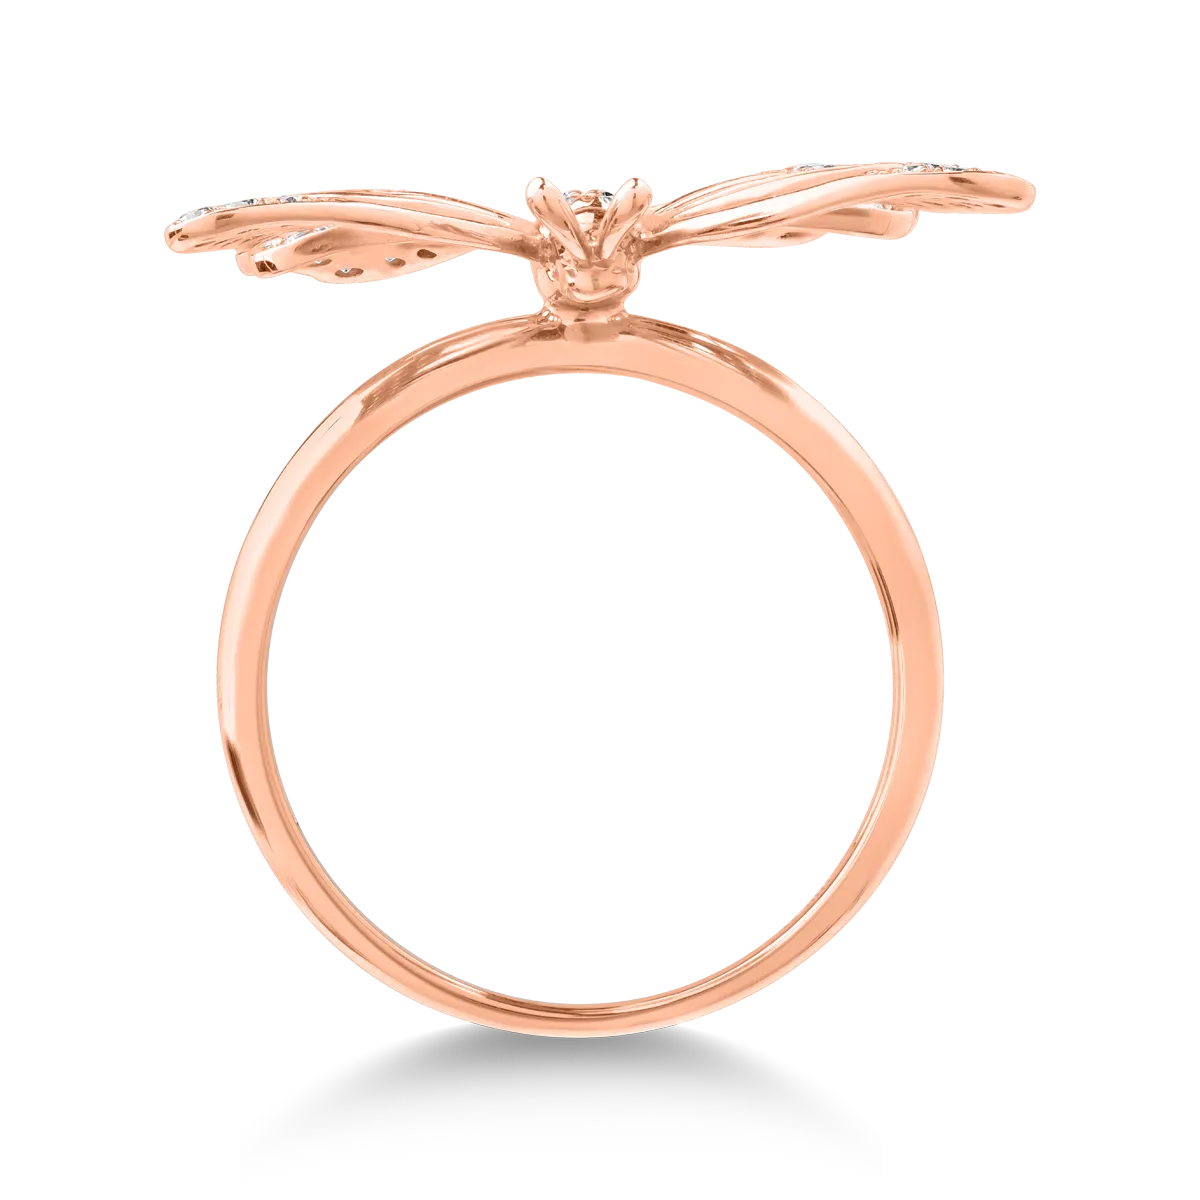 18K rose gold butterfly ring with 0.55ct diamonds